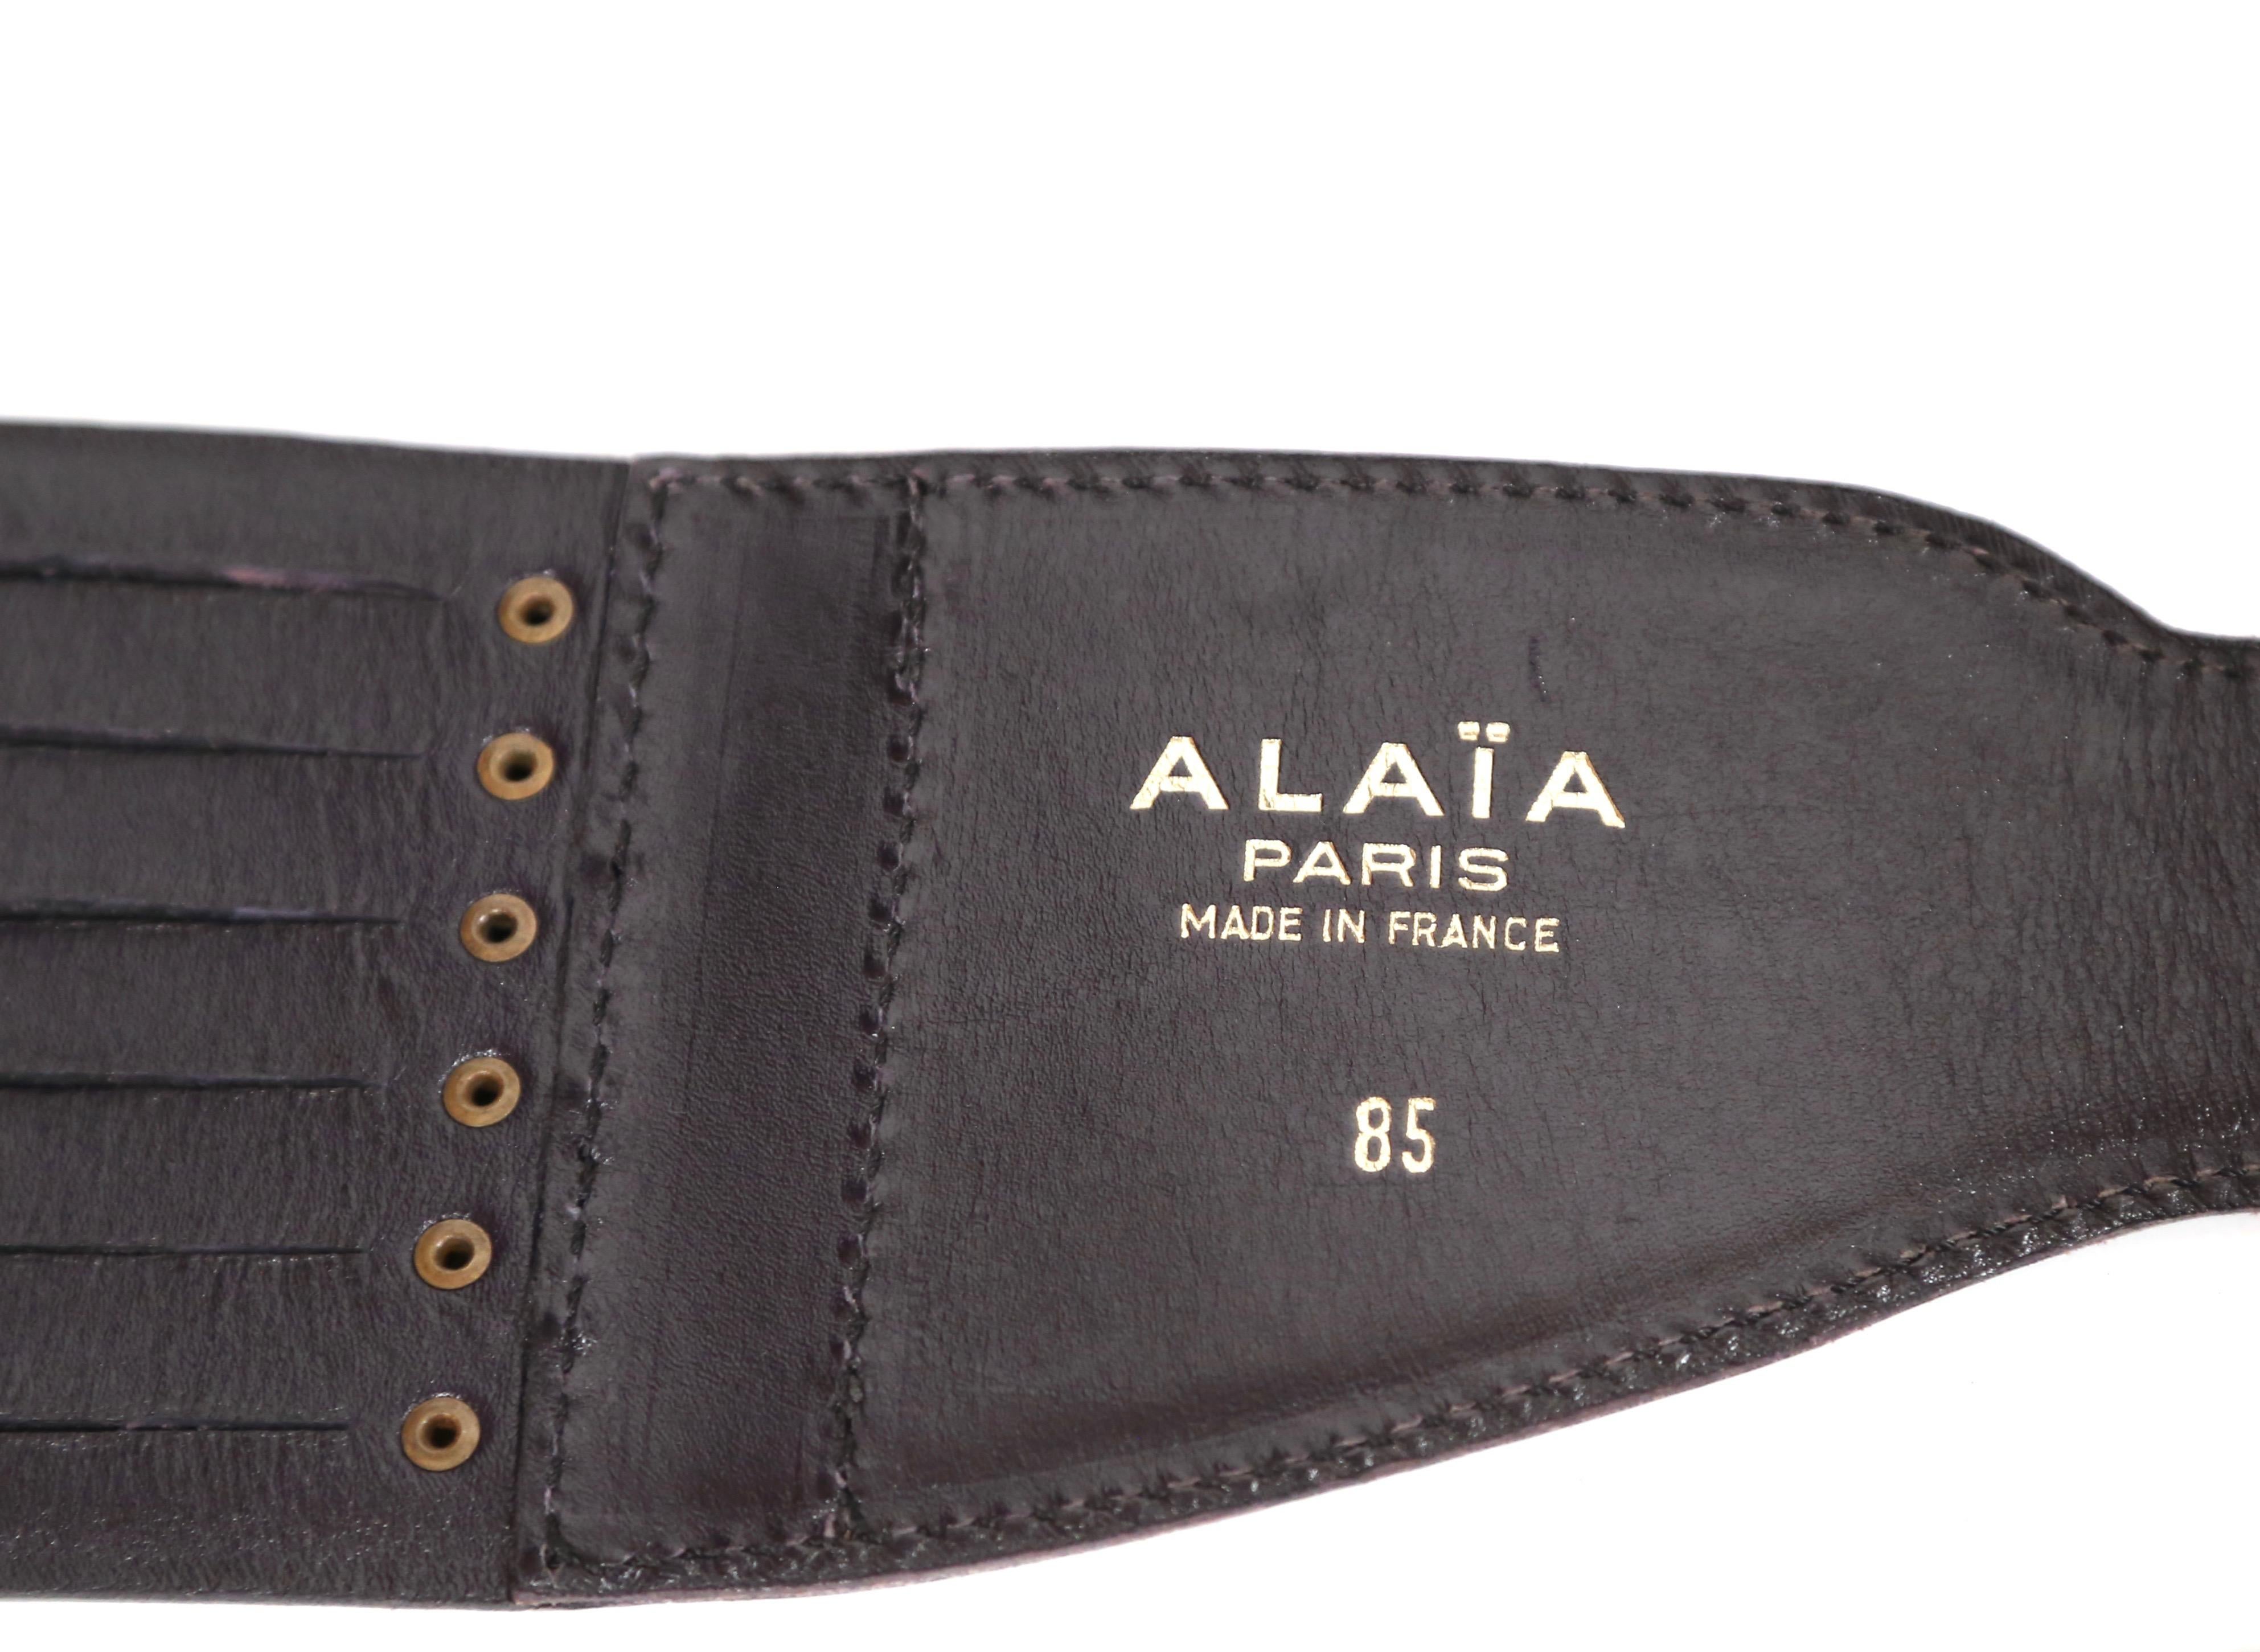 Midnight-blue leather corset belt from Alaia dating to the 1990's. French size 85, which best fits a 30-33